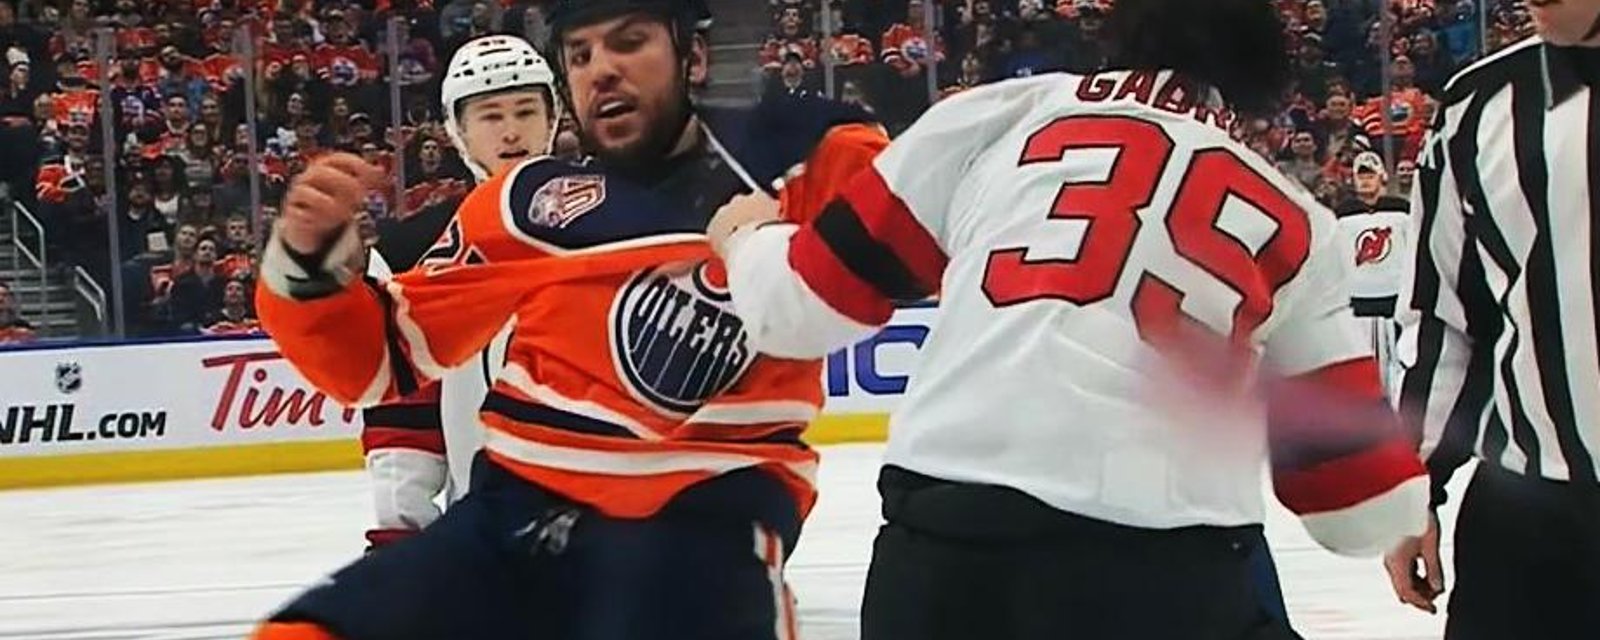 Lucic and Gabriel heavyweight fight goes a full 12 rounds! 